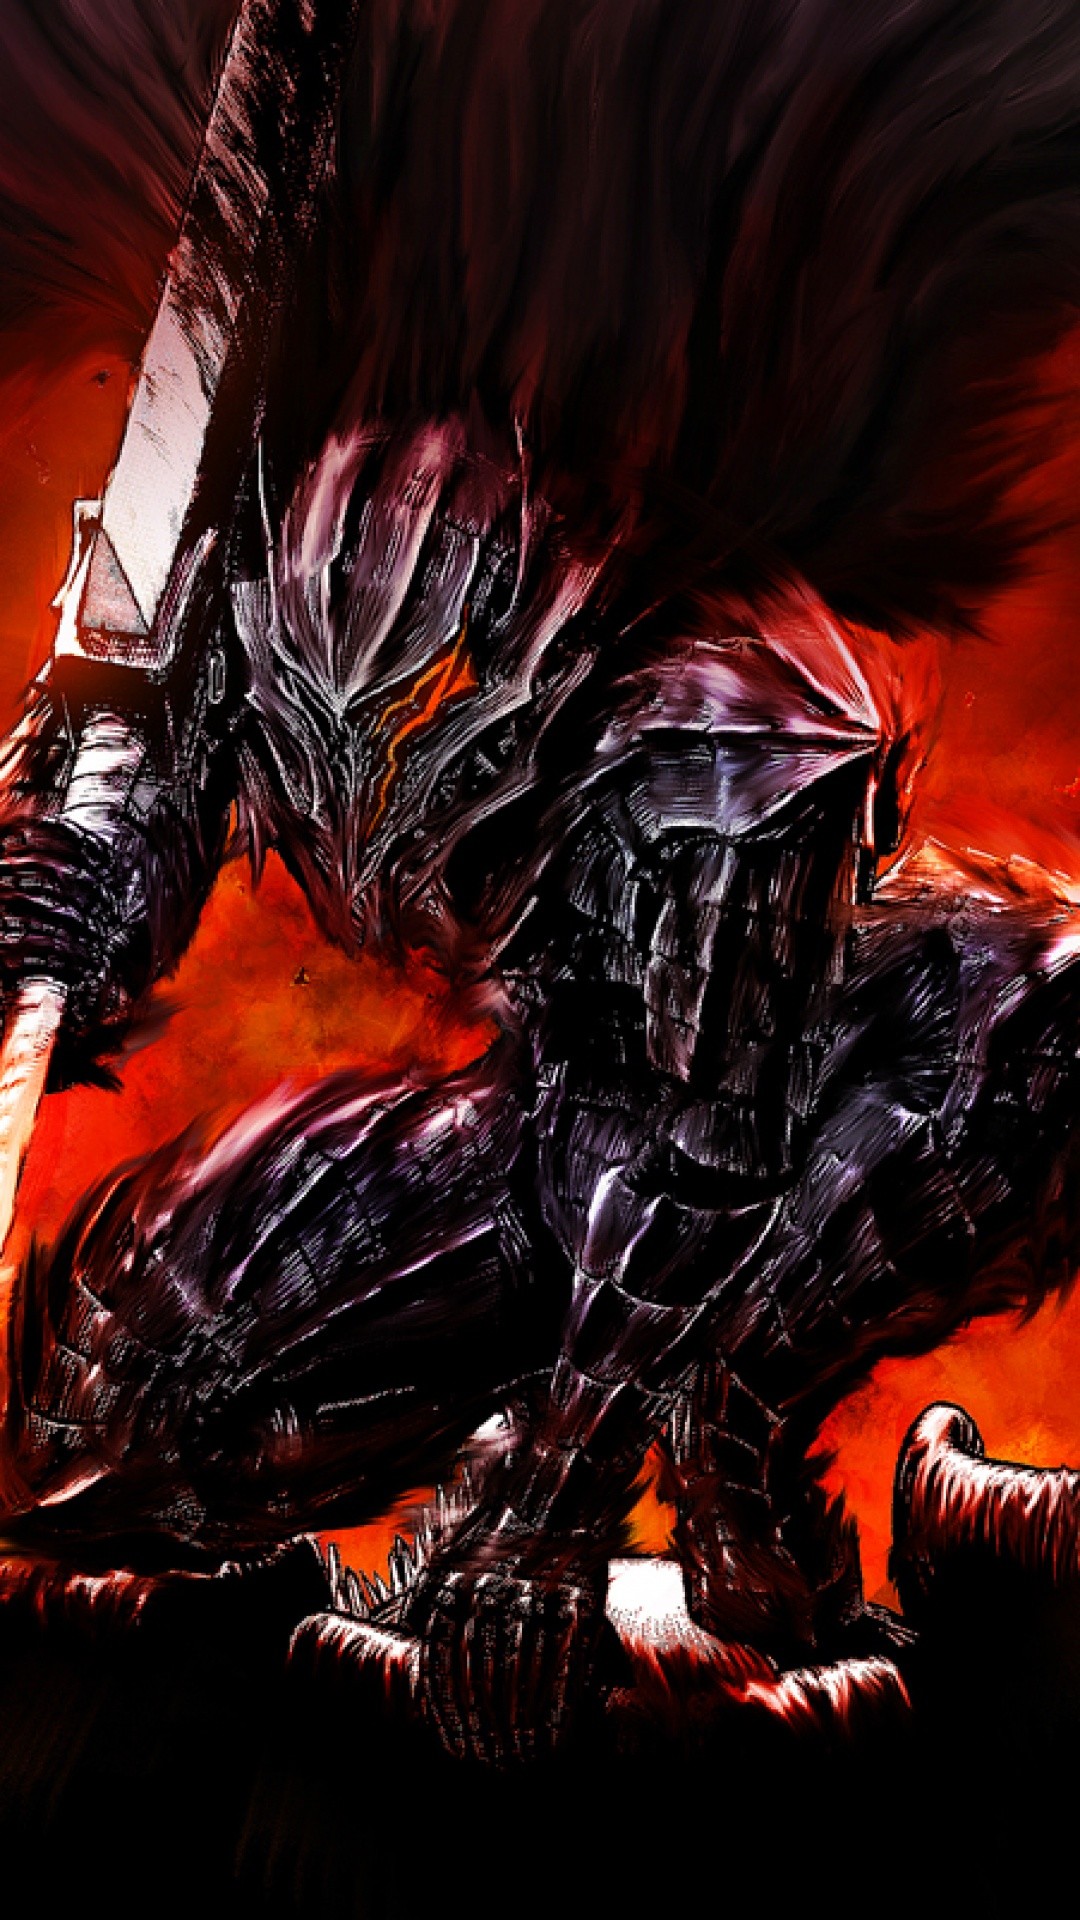 1080x1920 ... 468 Berserk HD Wallpapers | Backgrounds - Wallpaper Abyss - Page 2 ...